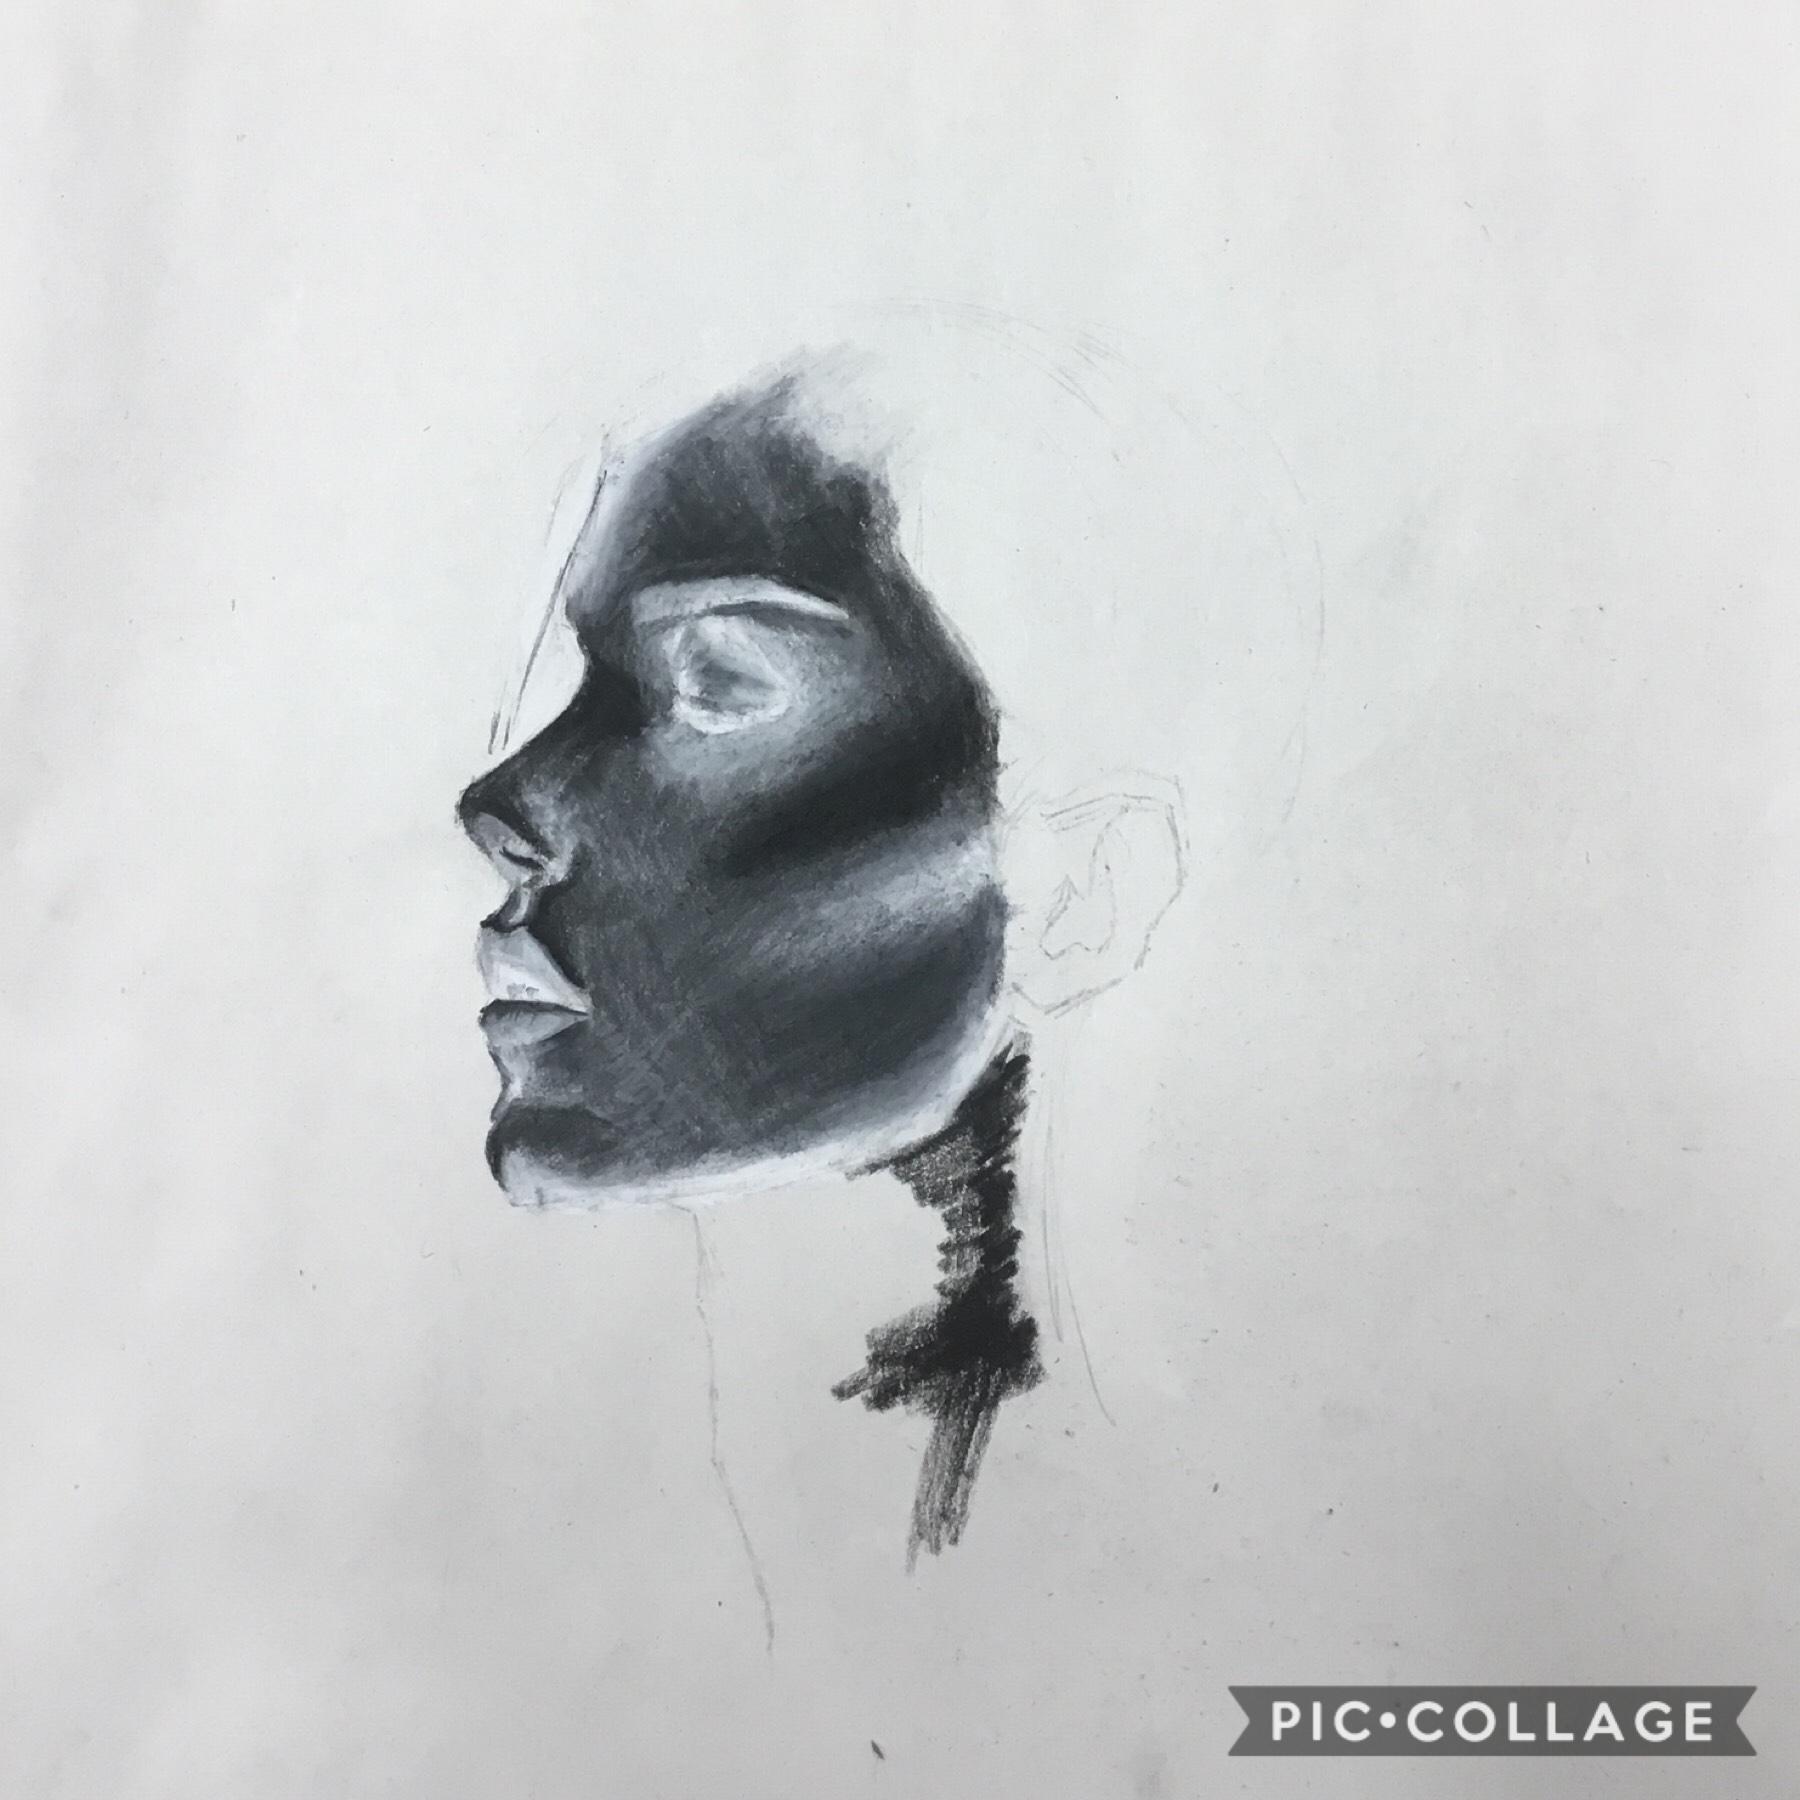 idk if I posted this already but inverted photos are awesome. did this over the summer btw. currently working on a big charcoal piece 🤧